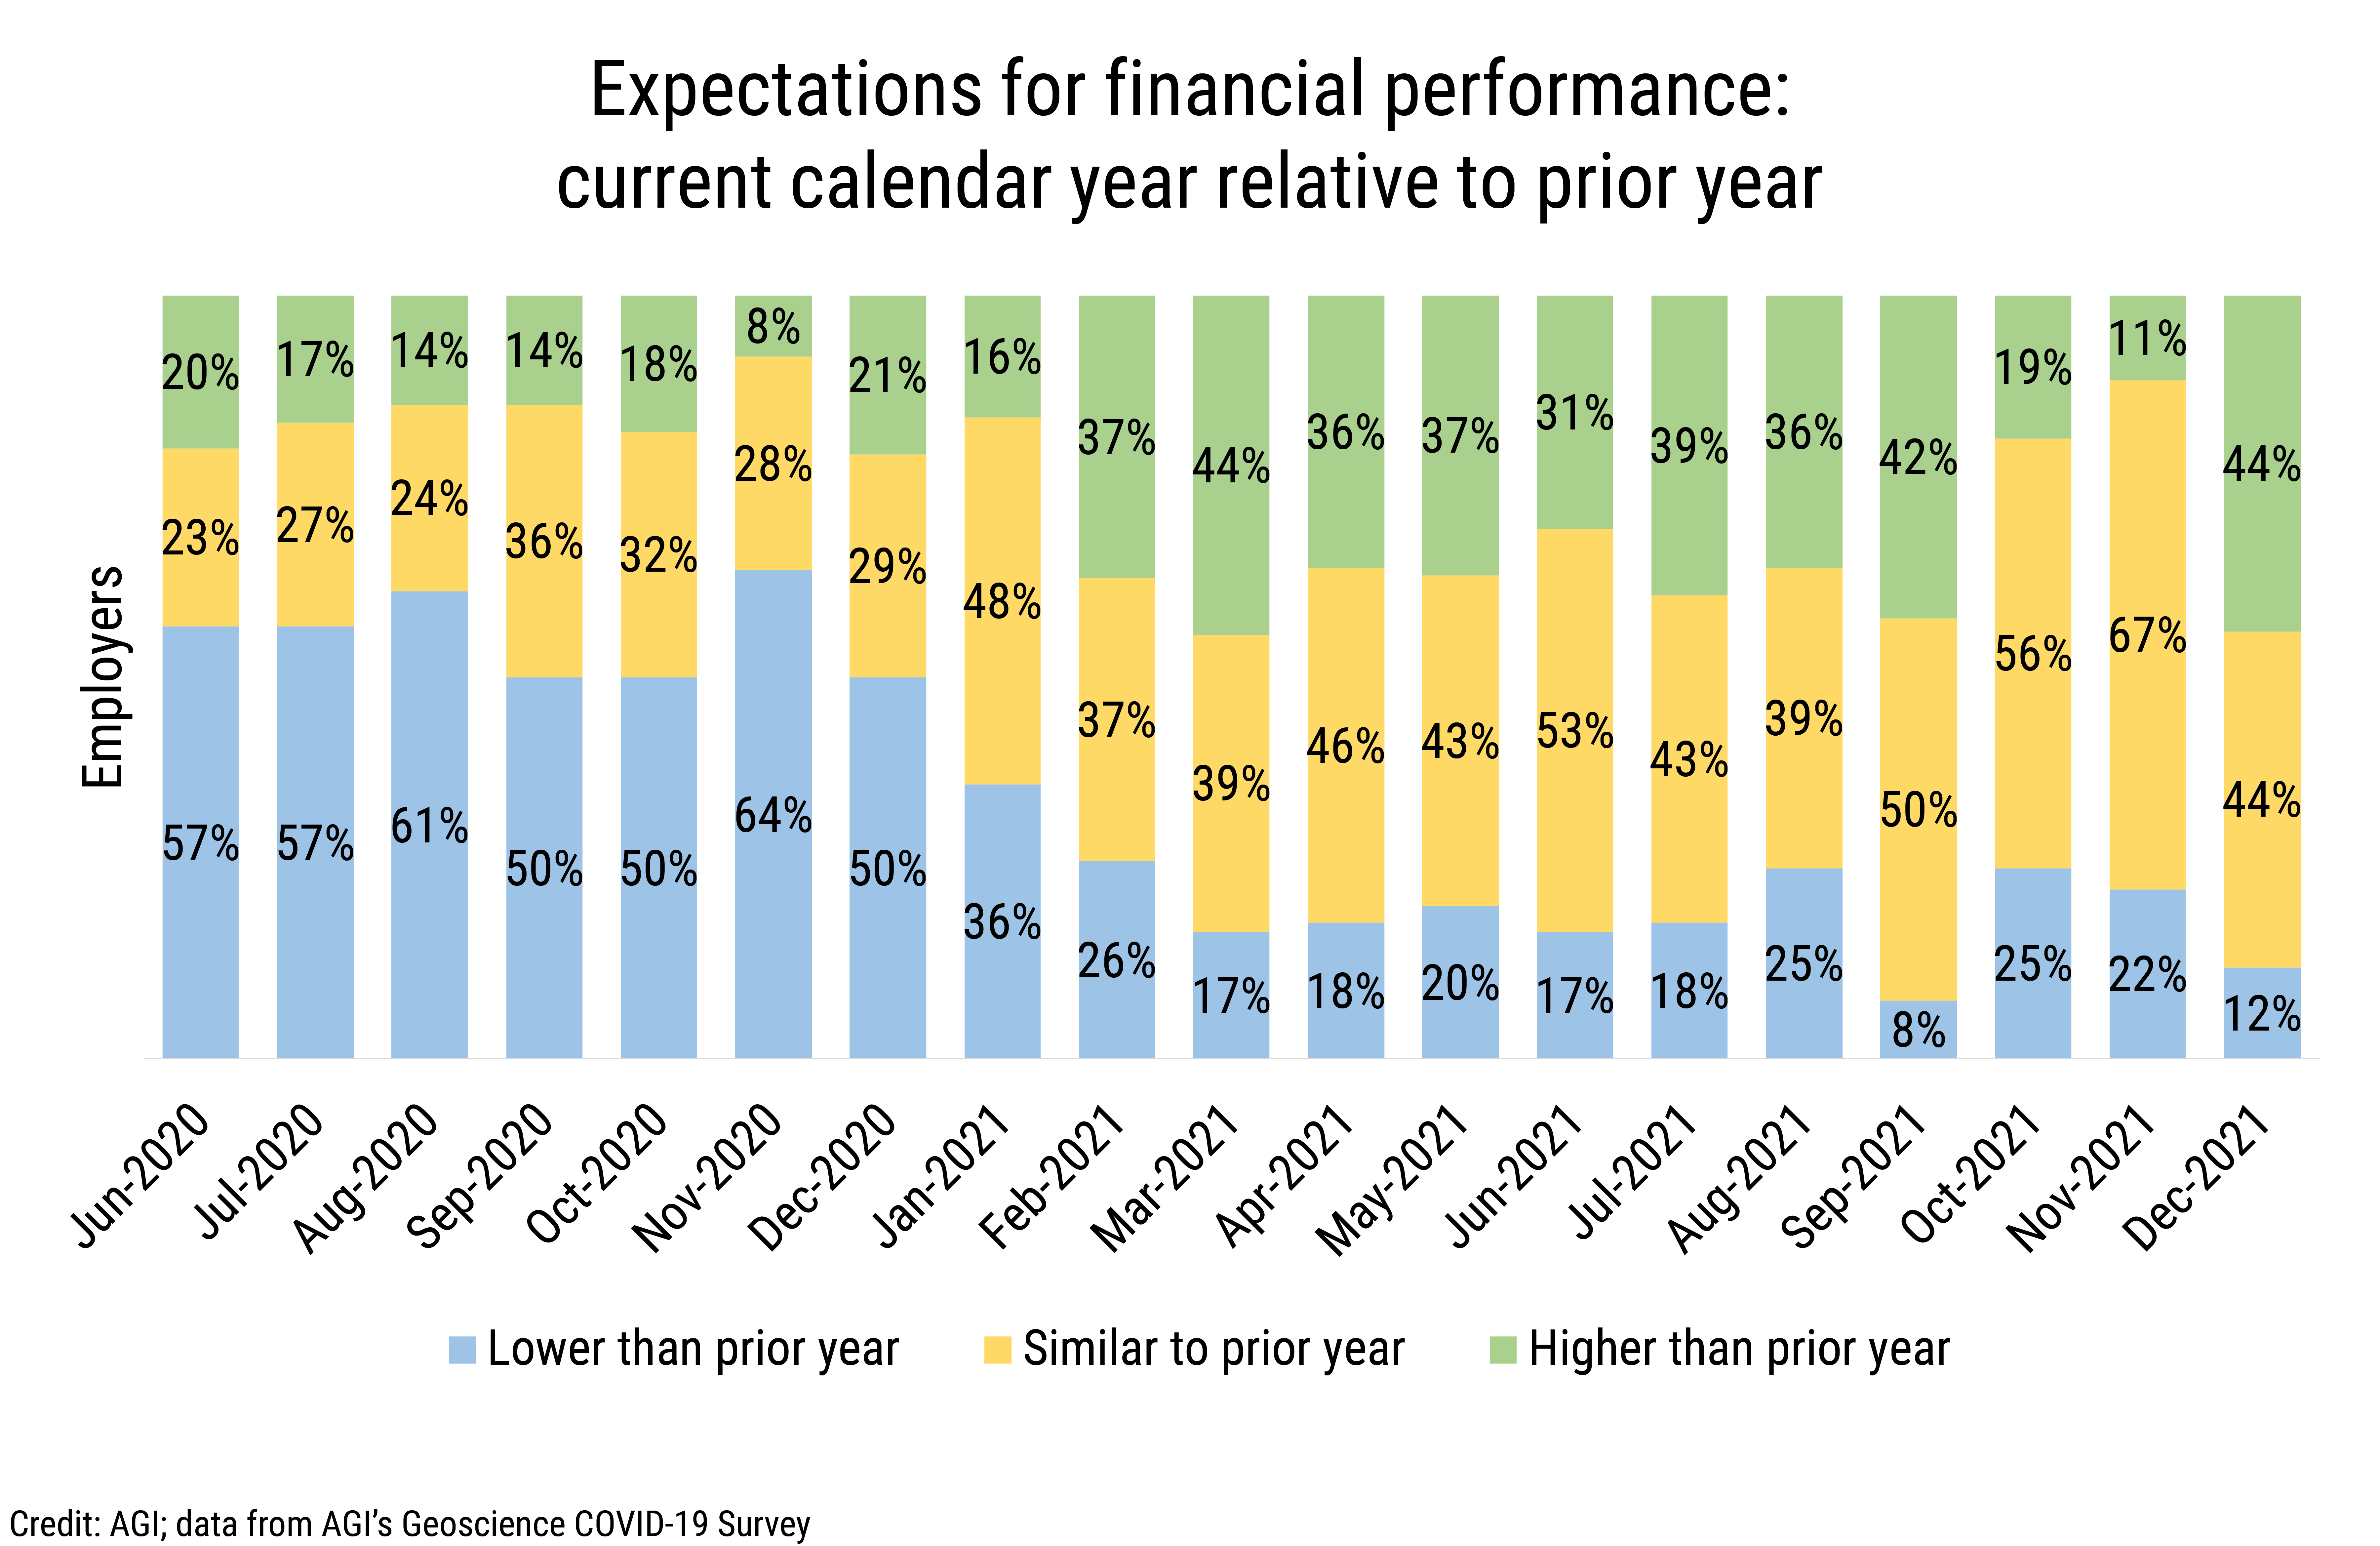 DB_2022-002 chart 01: Expectations for financial performance: current calendar year relative to prior year (Credit: AGI; data from AGI's Geoscience COVID-19 Survey)